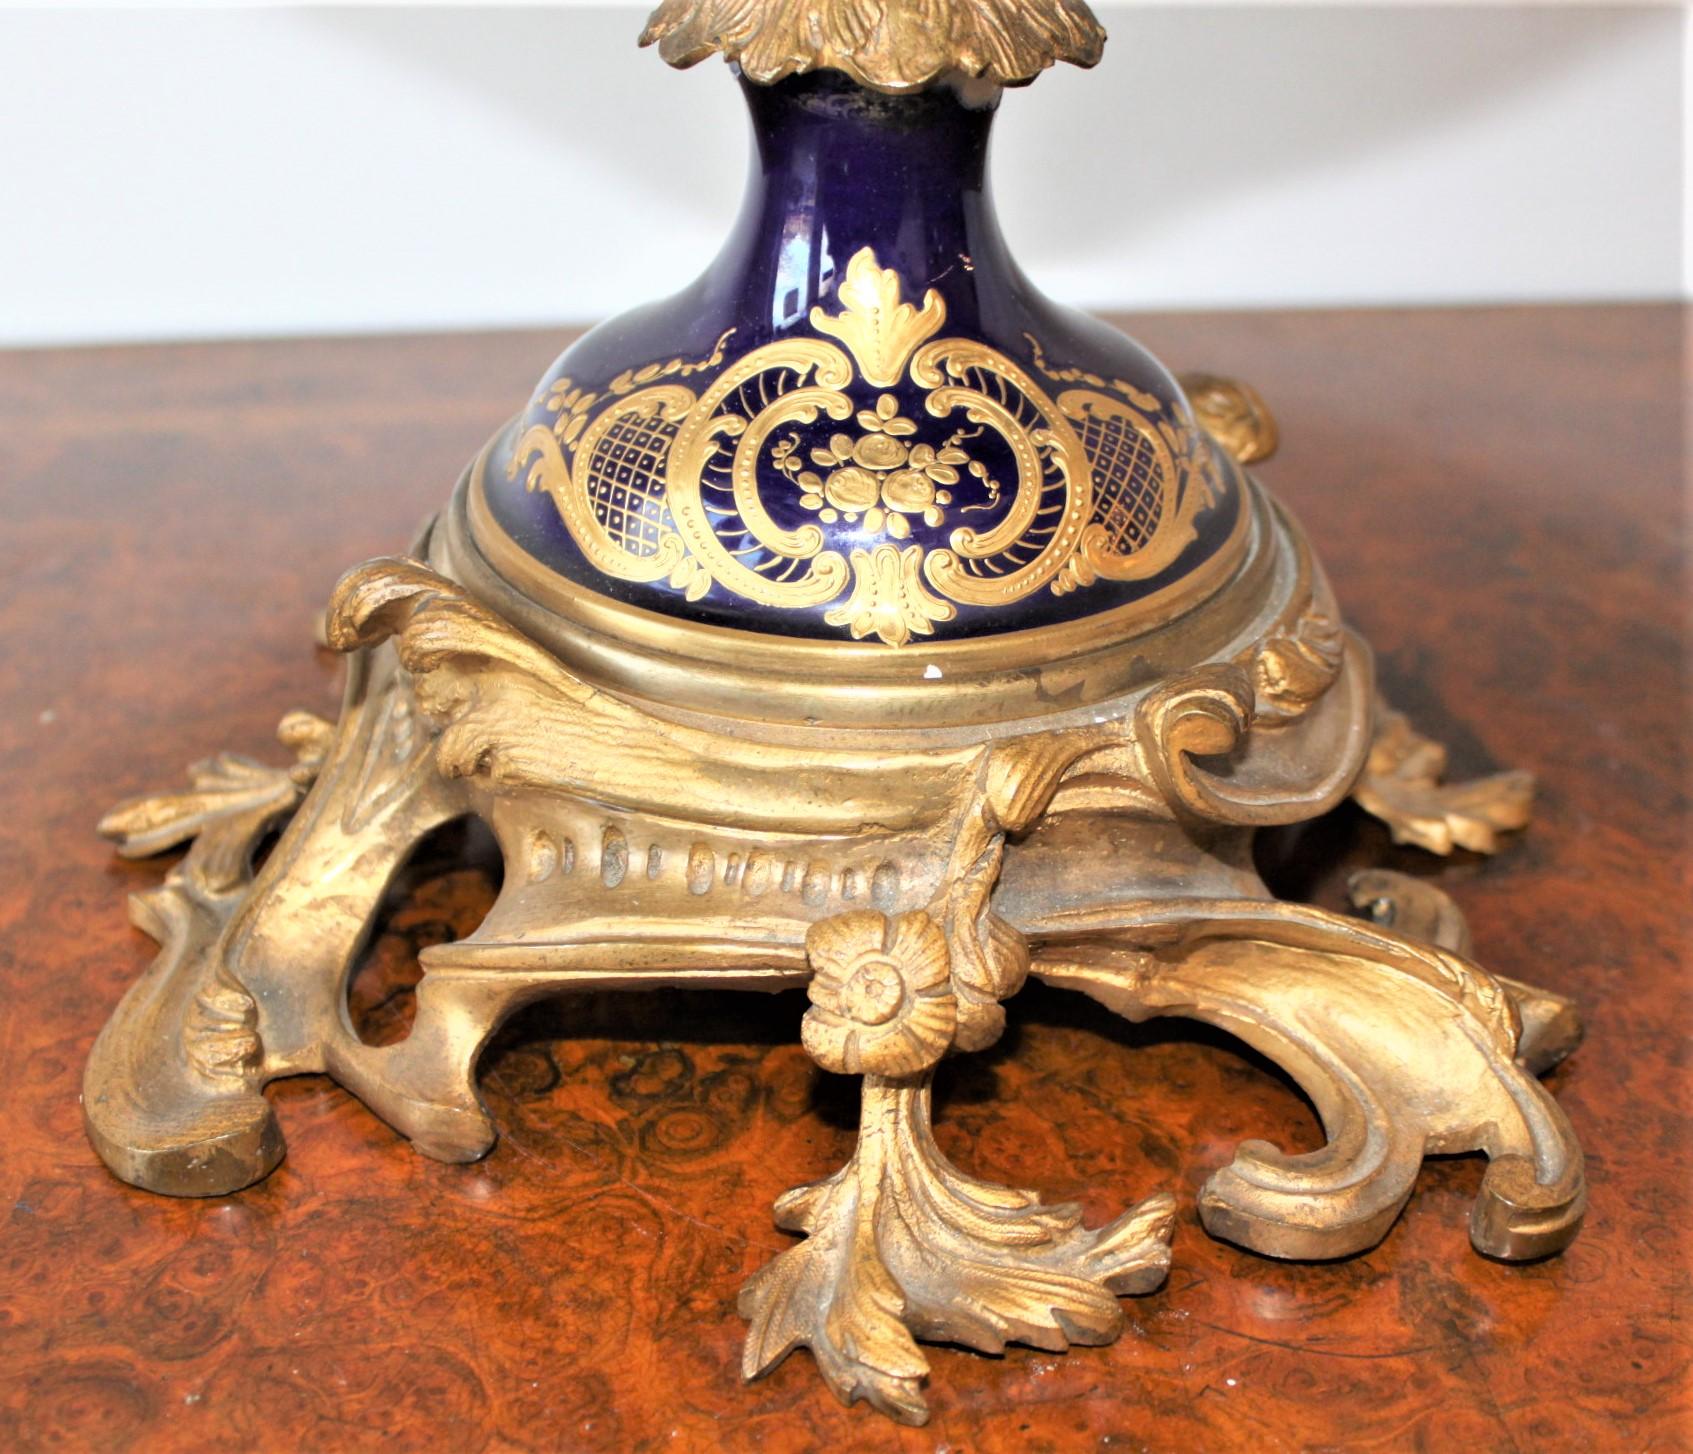 Antique Sevres Ormolu-Mounted and Hand Painted Porcelain Centerpiece or Compote 7